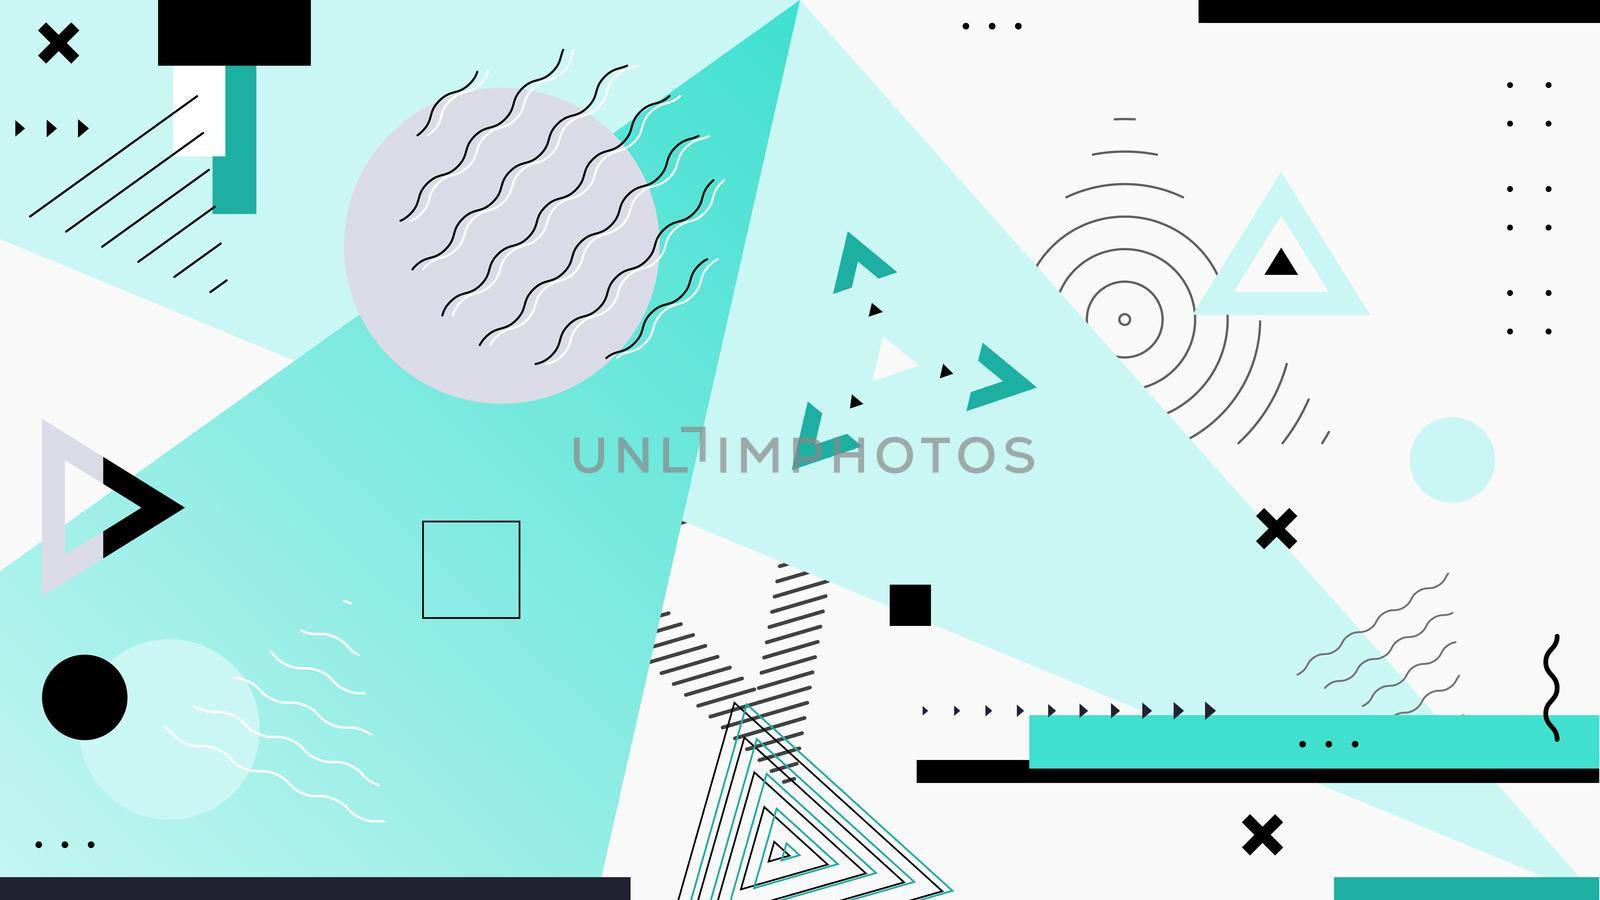 Dark vector geometric backround. Abstract design styled vintage trends 80-s. Minimalistic background